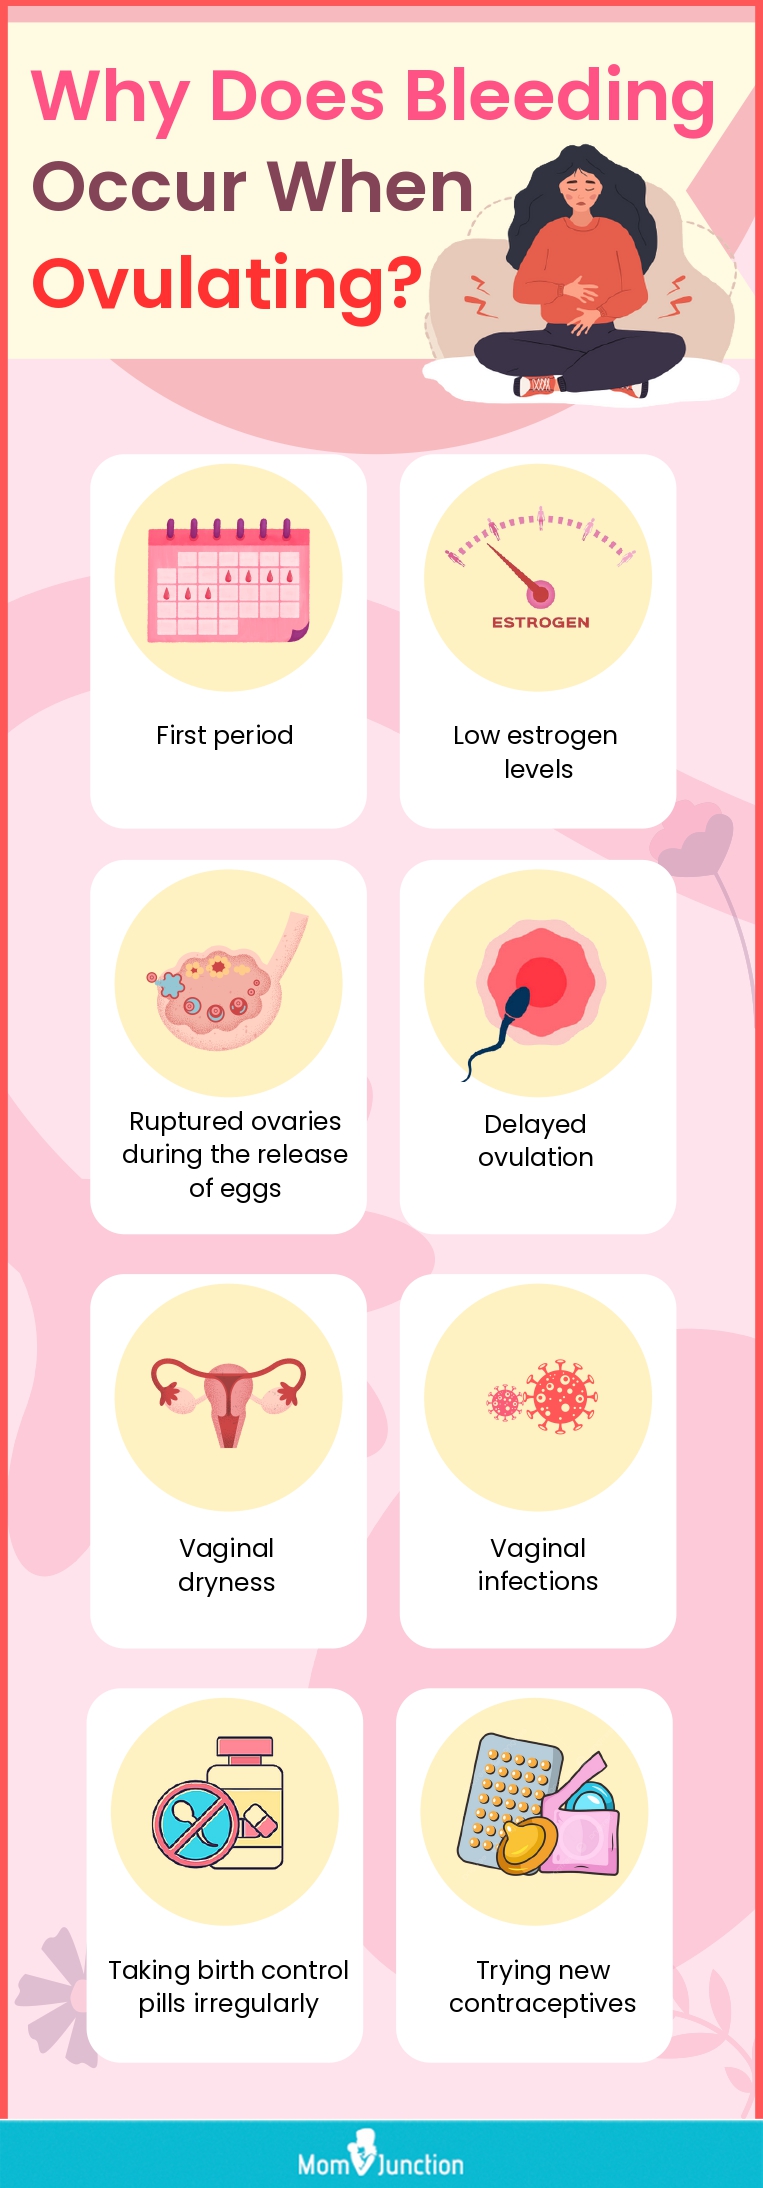 vaginal discharge during ovulation